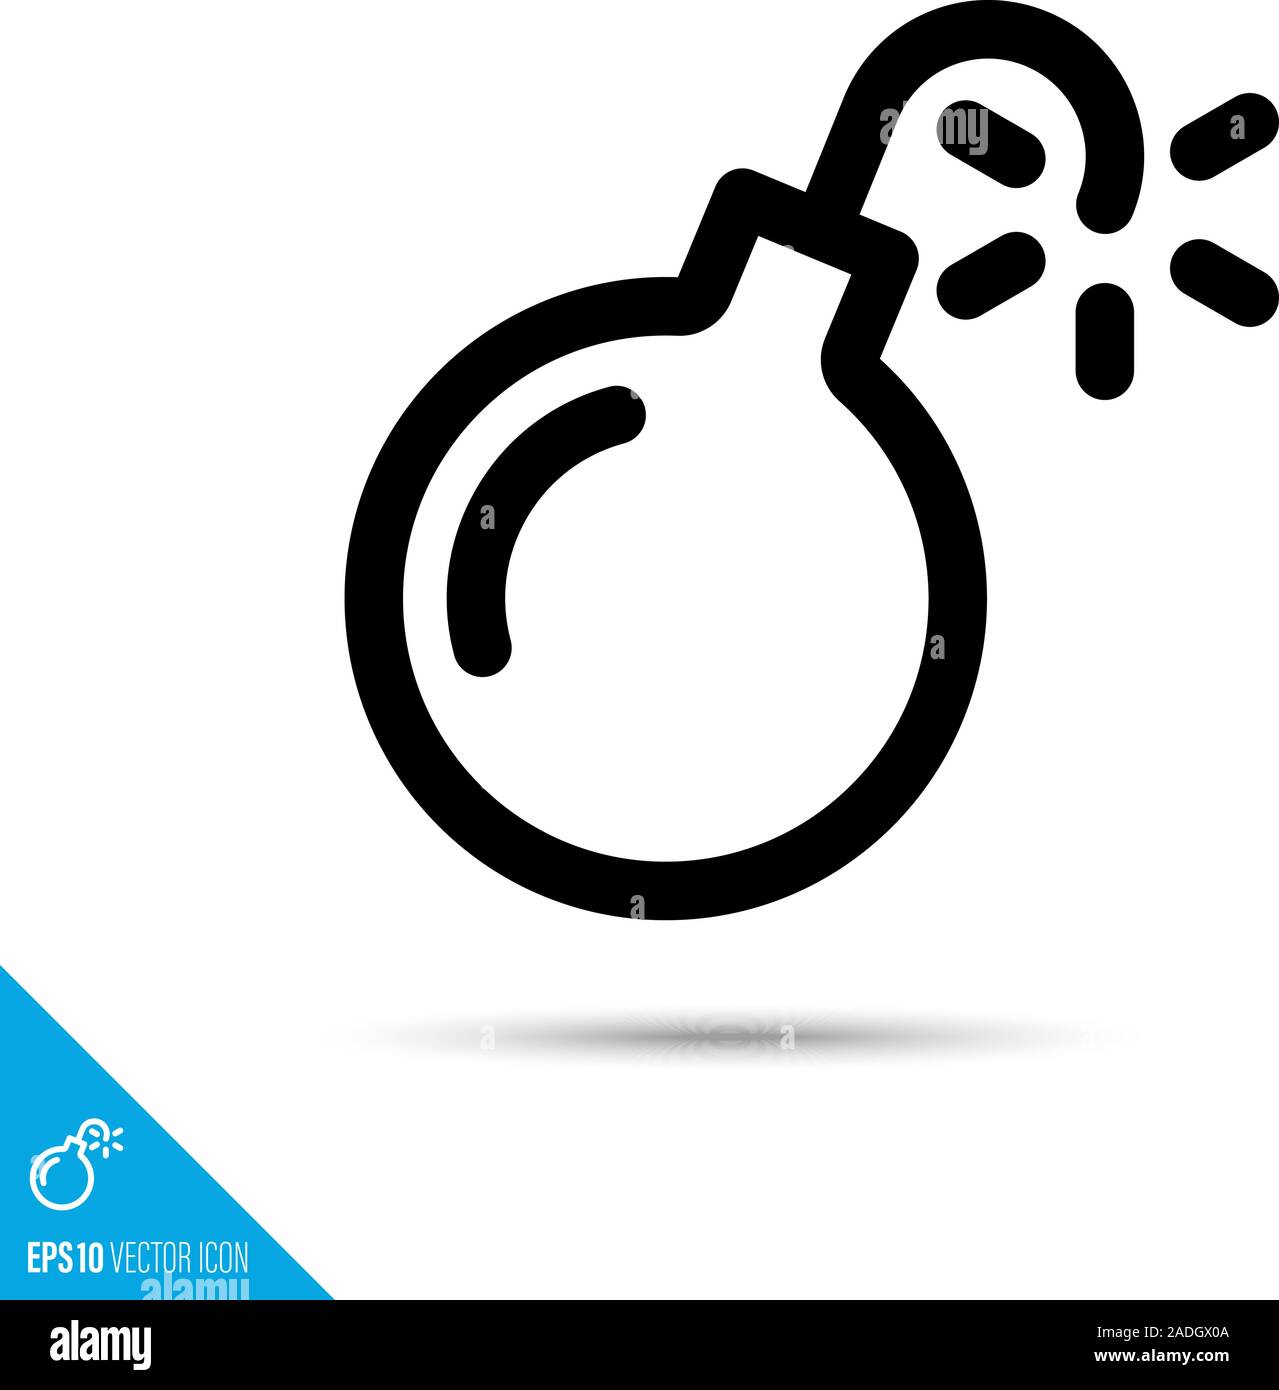 Bomb, harmful computer bug or virus line icon. Explosive with sparkling fuse. Cybersecurity vector symbol. User interface pictogram for web and apps. Stock Vector